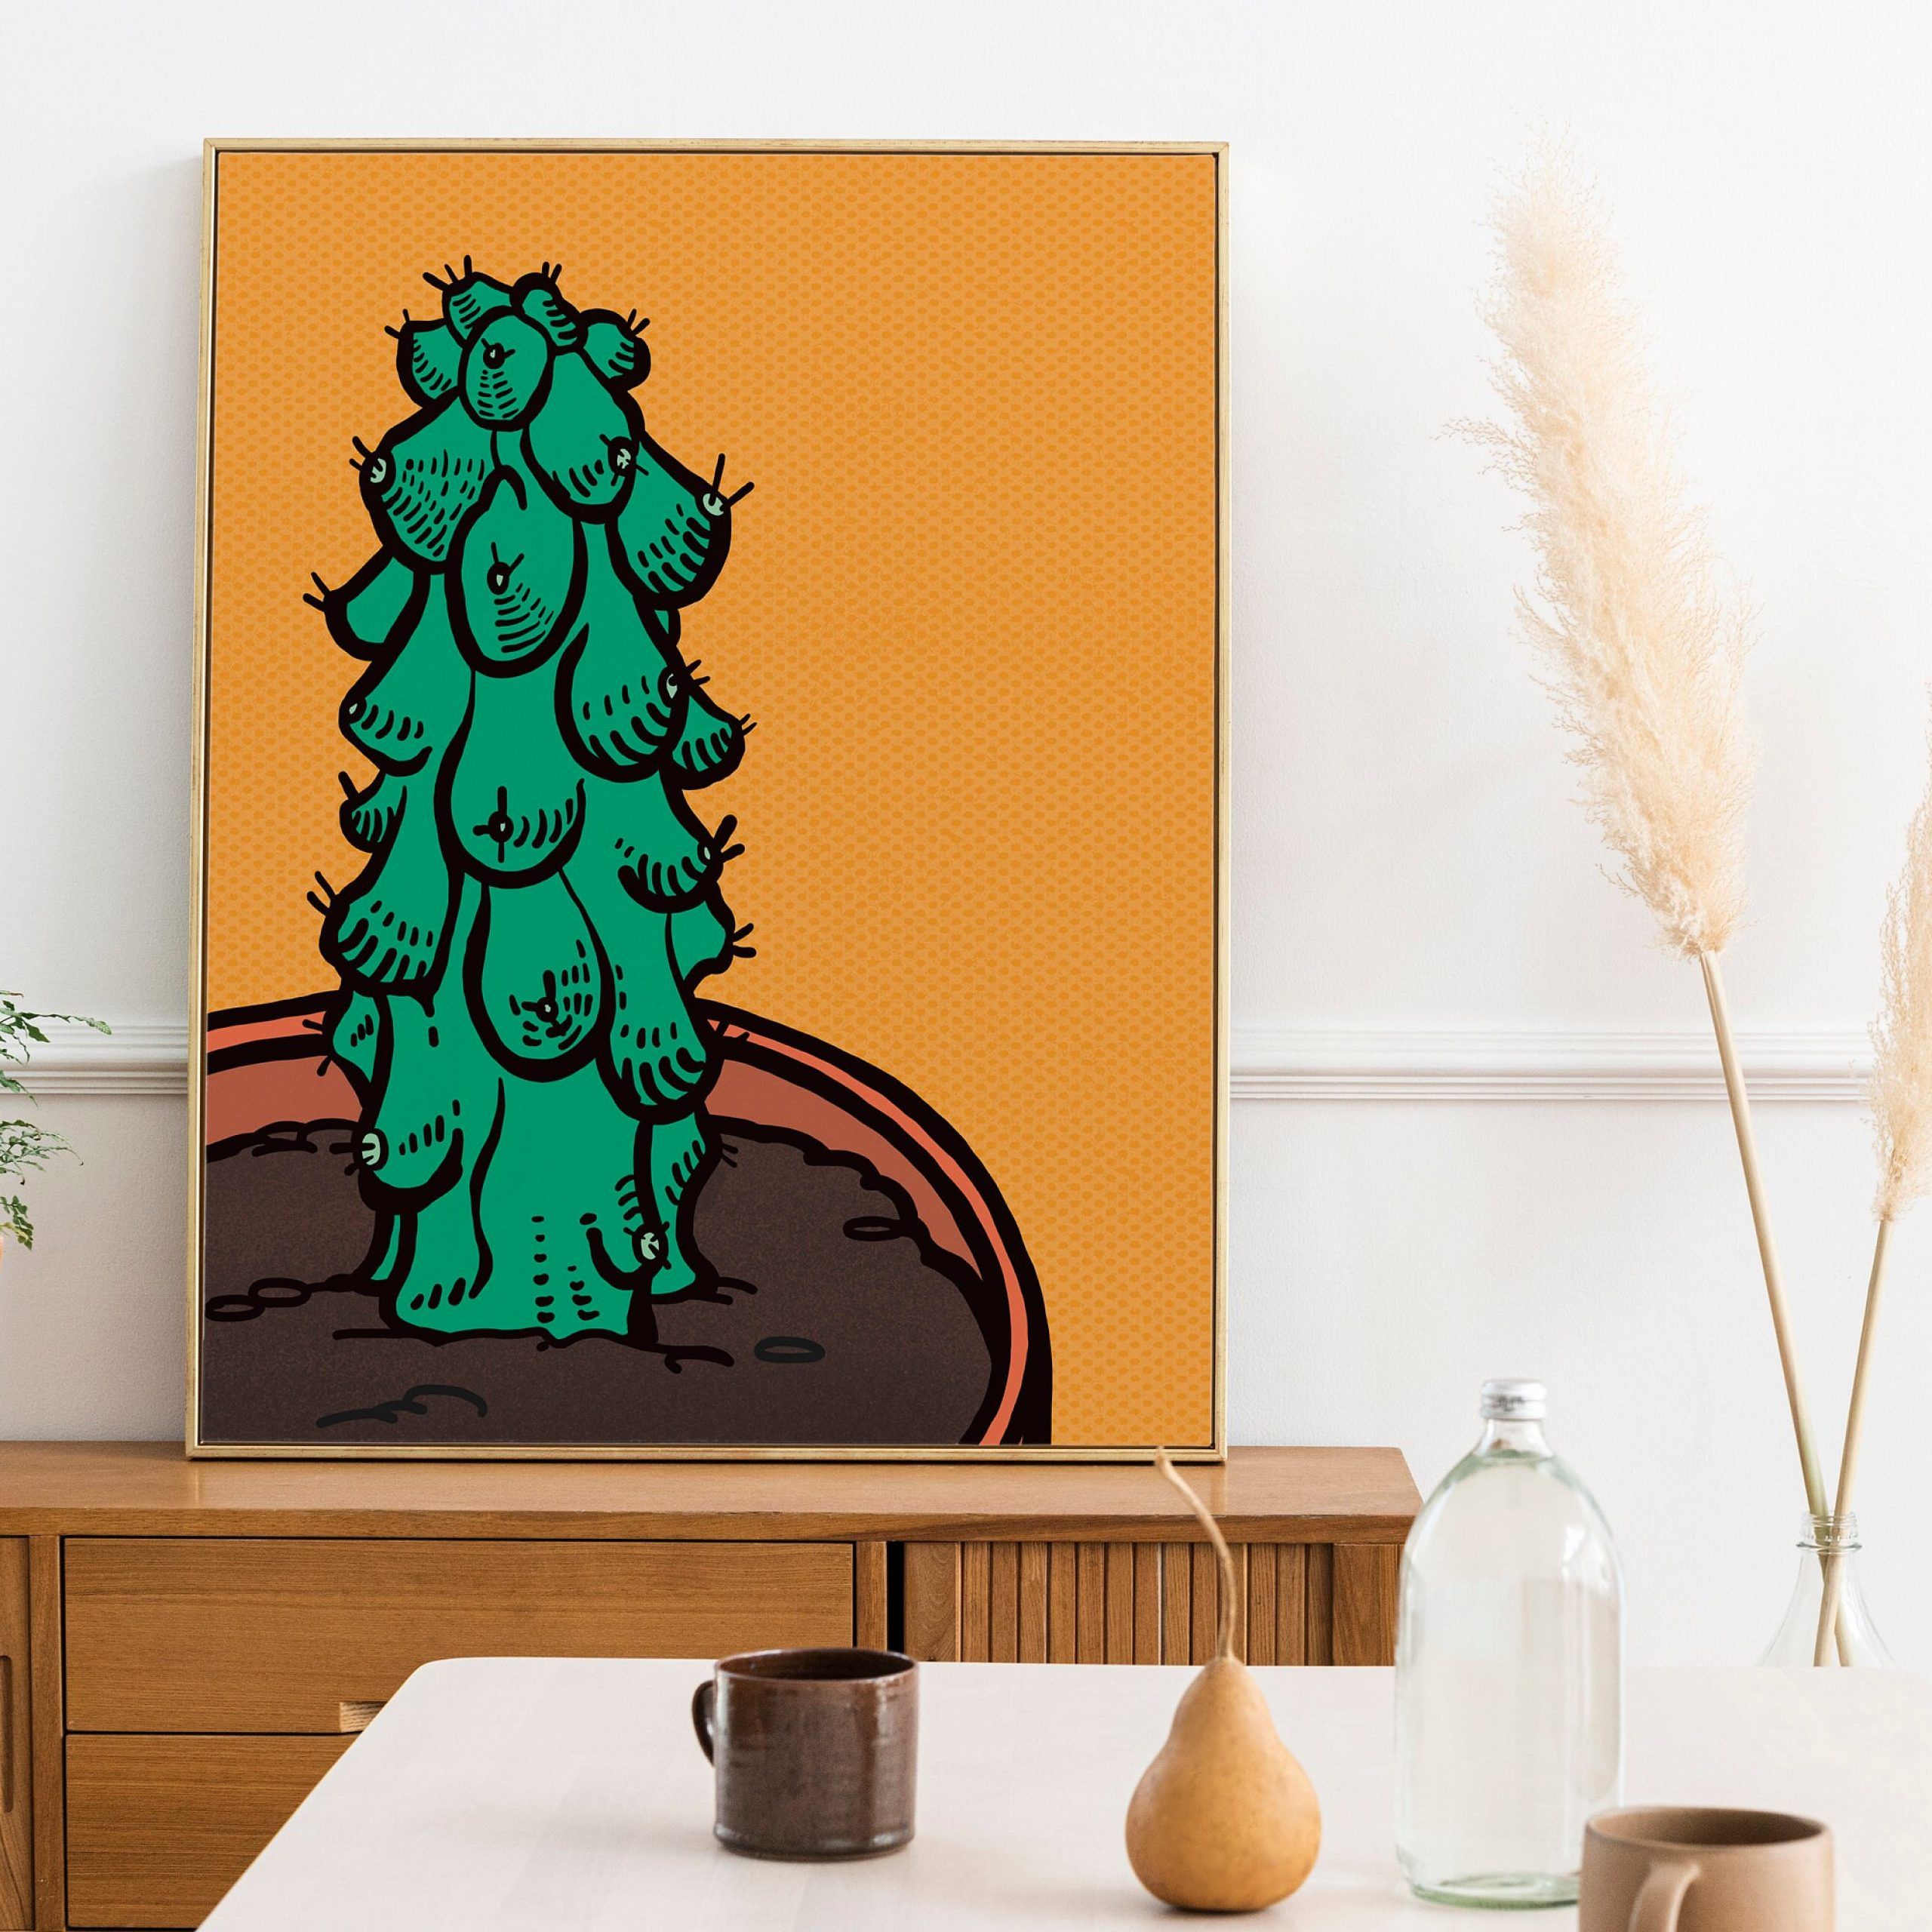 Best And Newest Cactus Printable Wall Art Mid Century Modern Art Colorful With Mid Century Modern Wall Art (View 7 of 20)